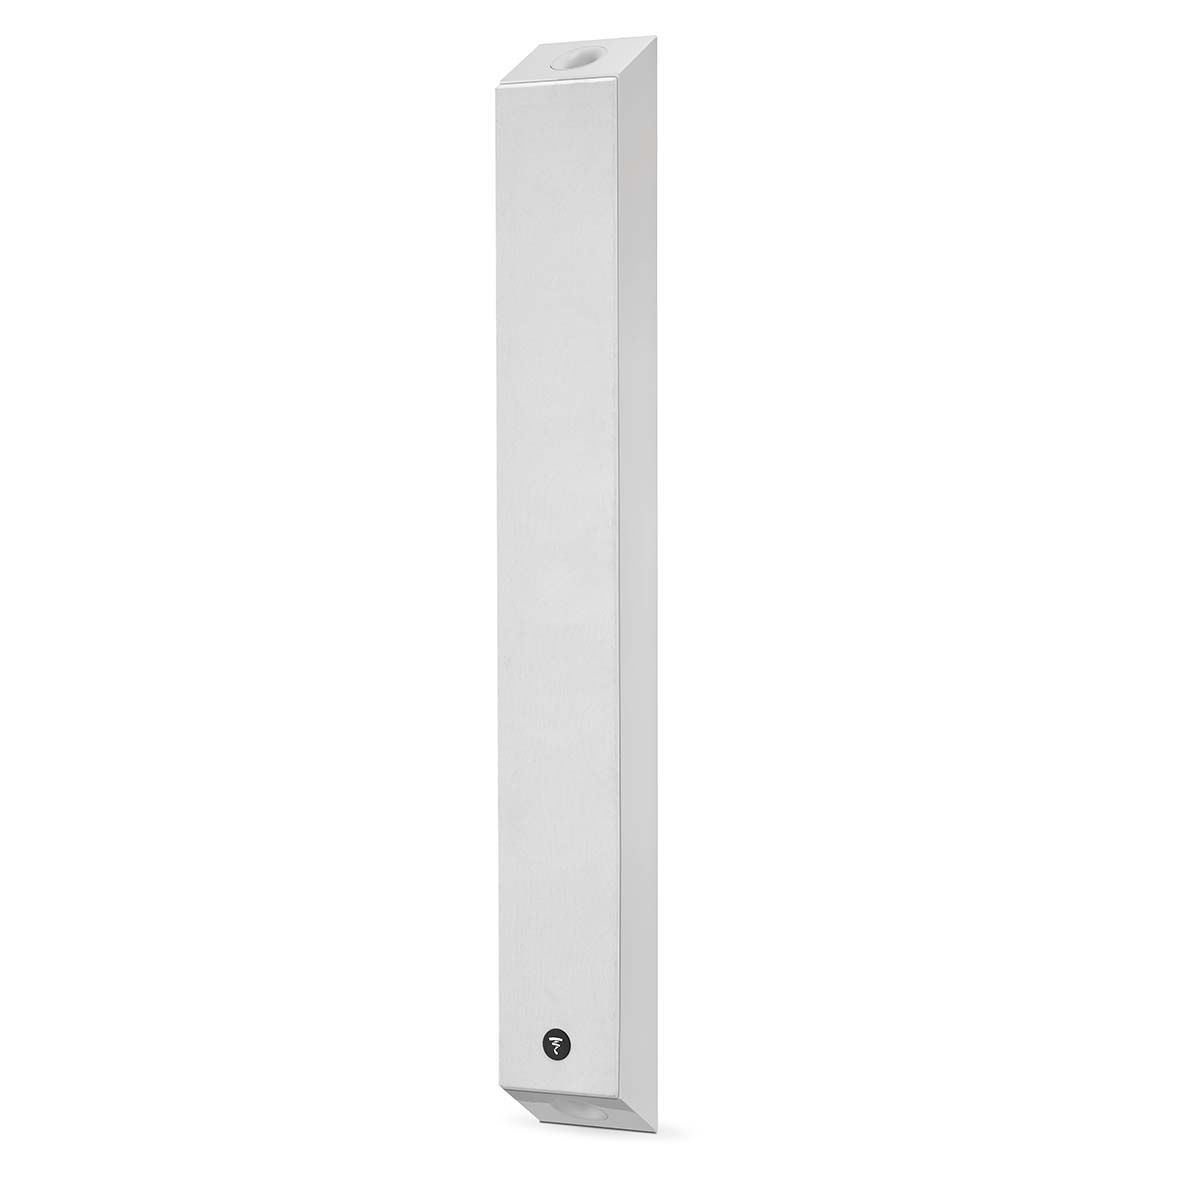 Focal On Wall 302 Speaker, Gloss White, vertical front angle with grille